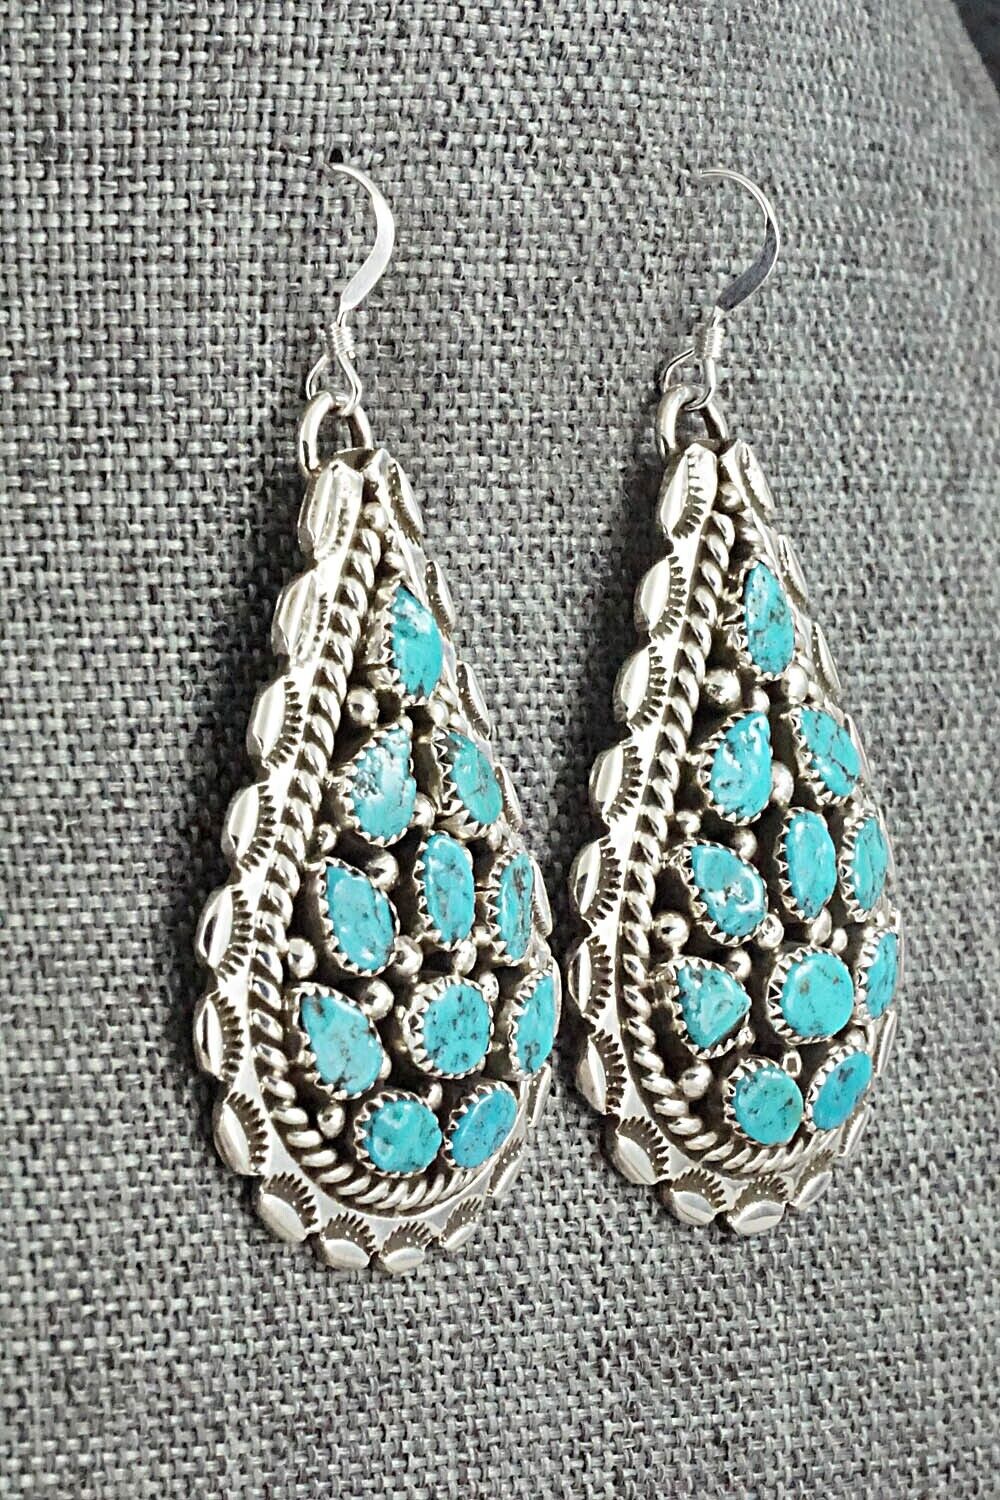 Turquoise & Sterling Silver Necklace and Earrings Set - Tina Jones